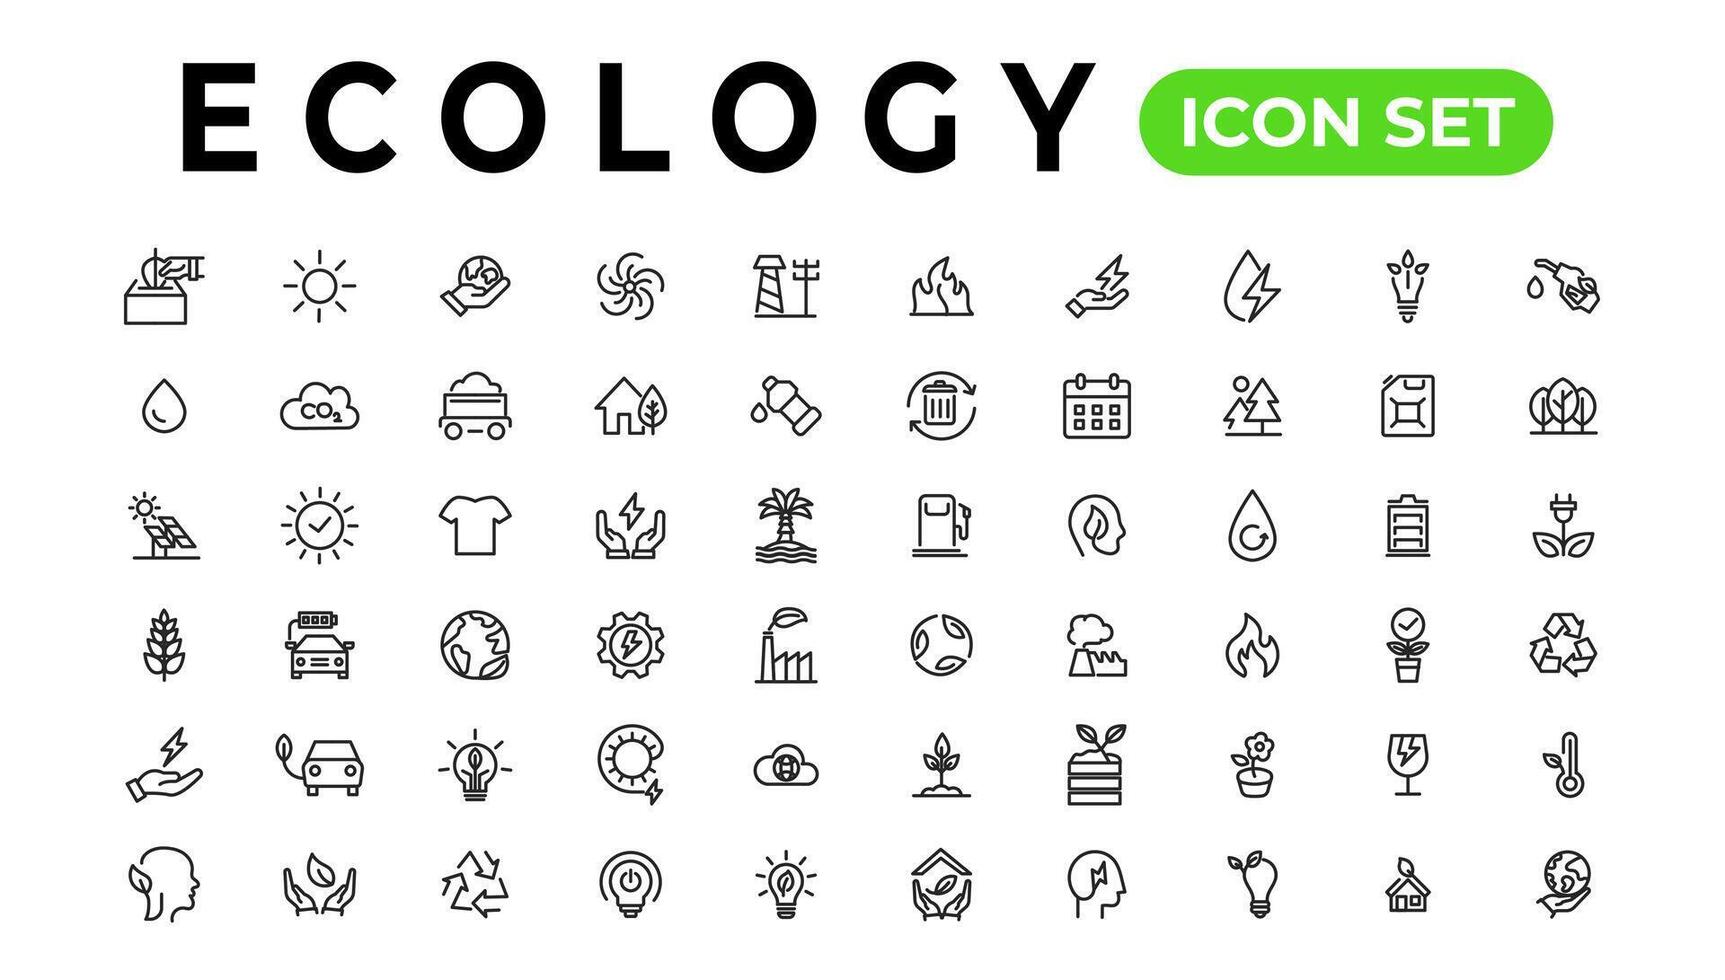 Ecology line icons set. Renewable energy outline icons collection. Solar panel, recycle, eco, bio, power, water - stock vector